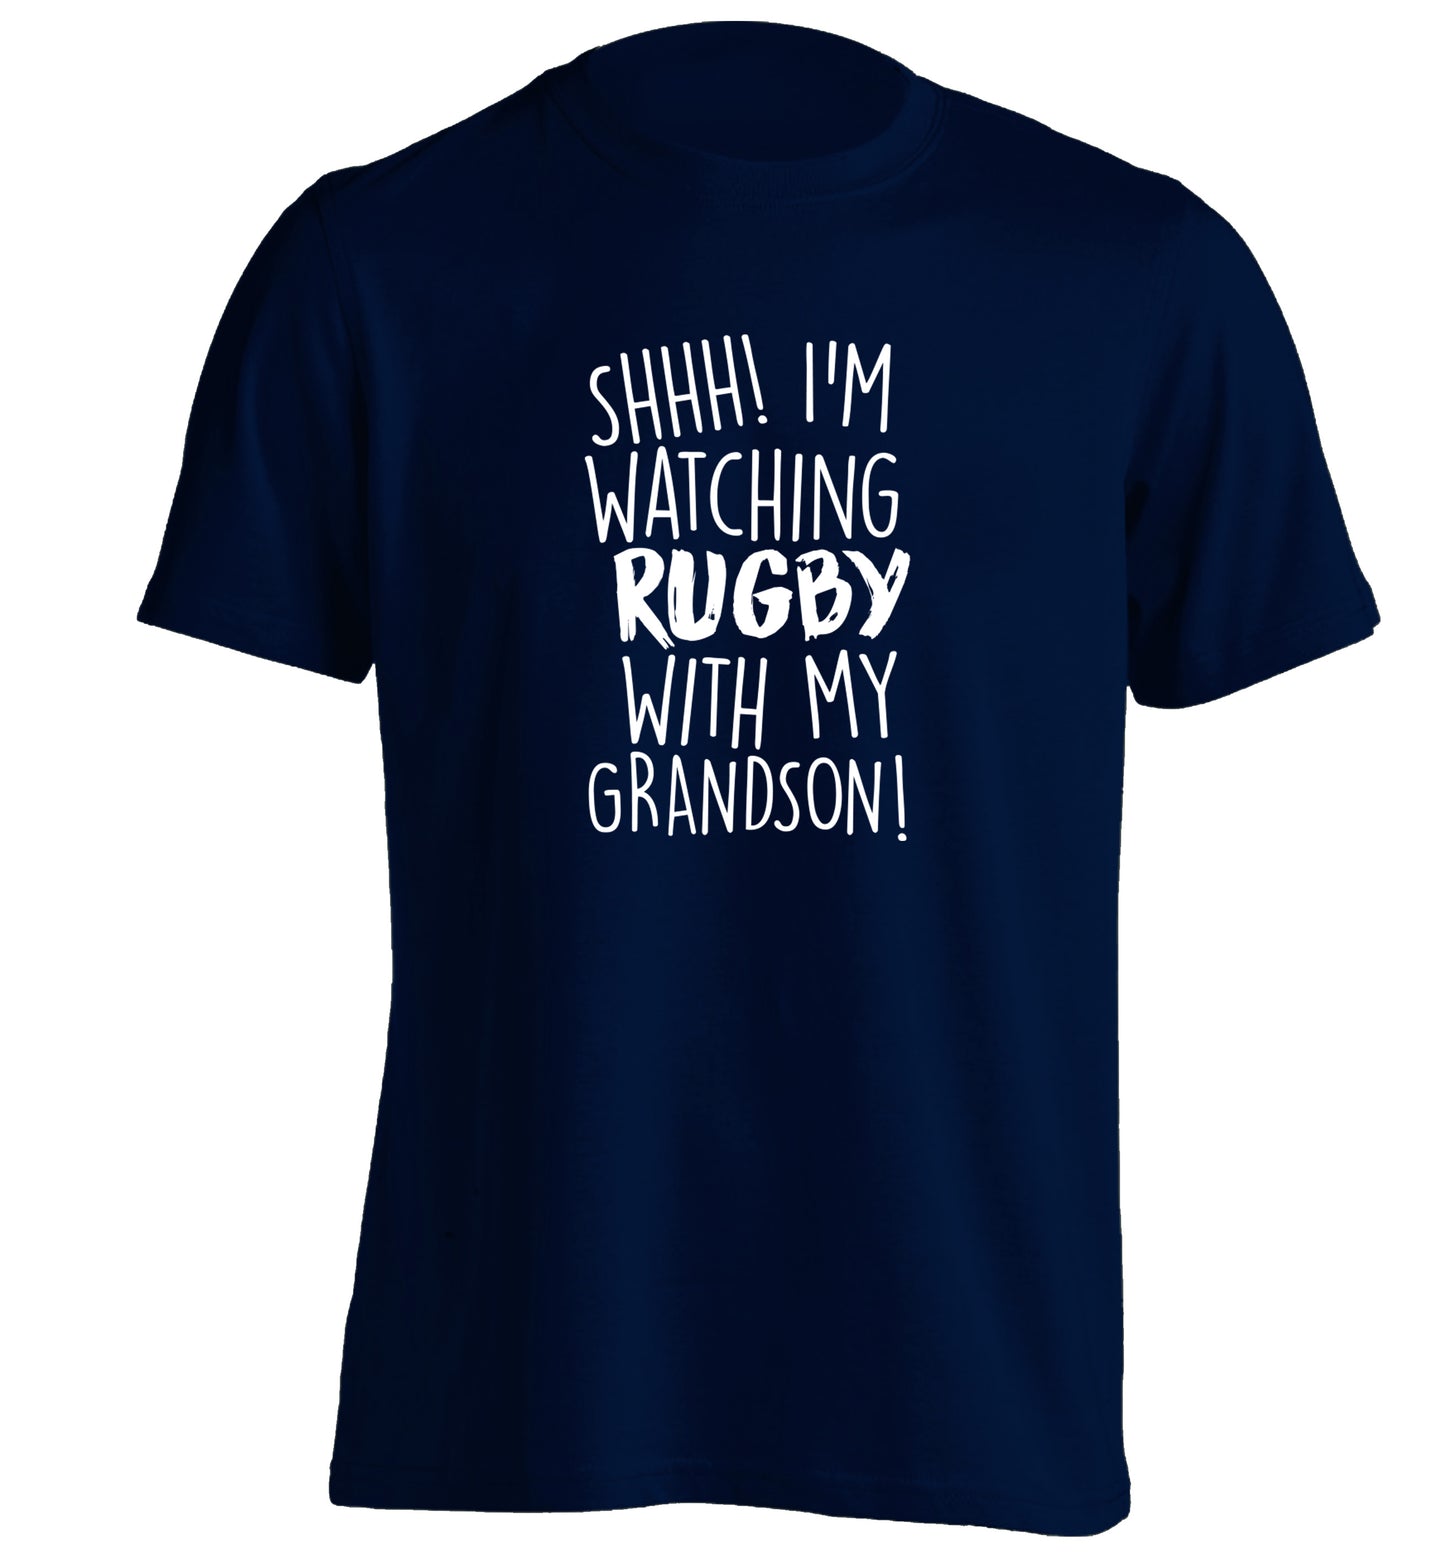 Shh I'm watching rugby with my grandson adults unisex navy Tshirt 2XL